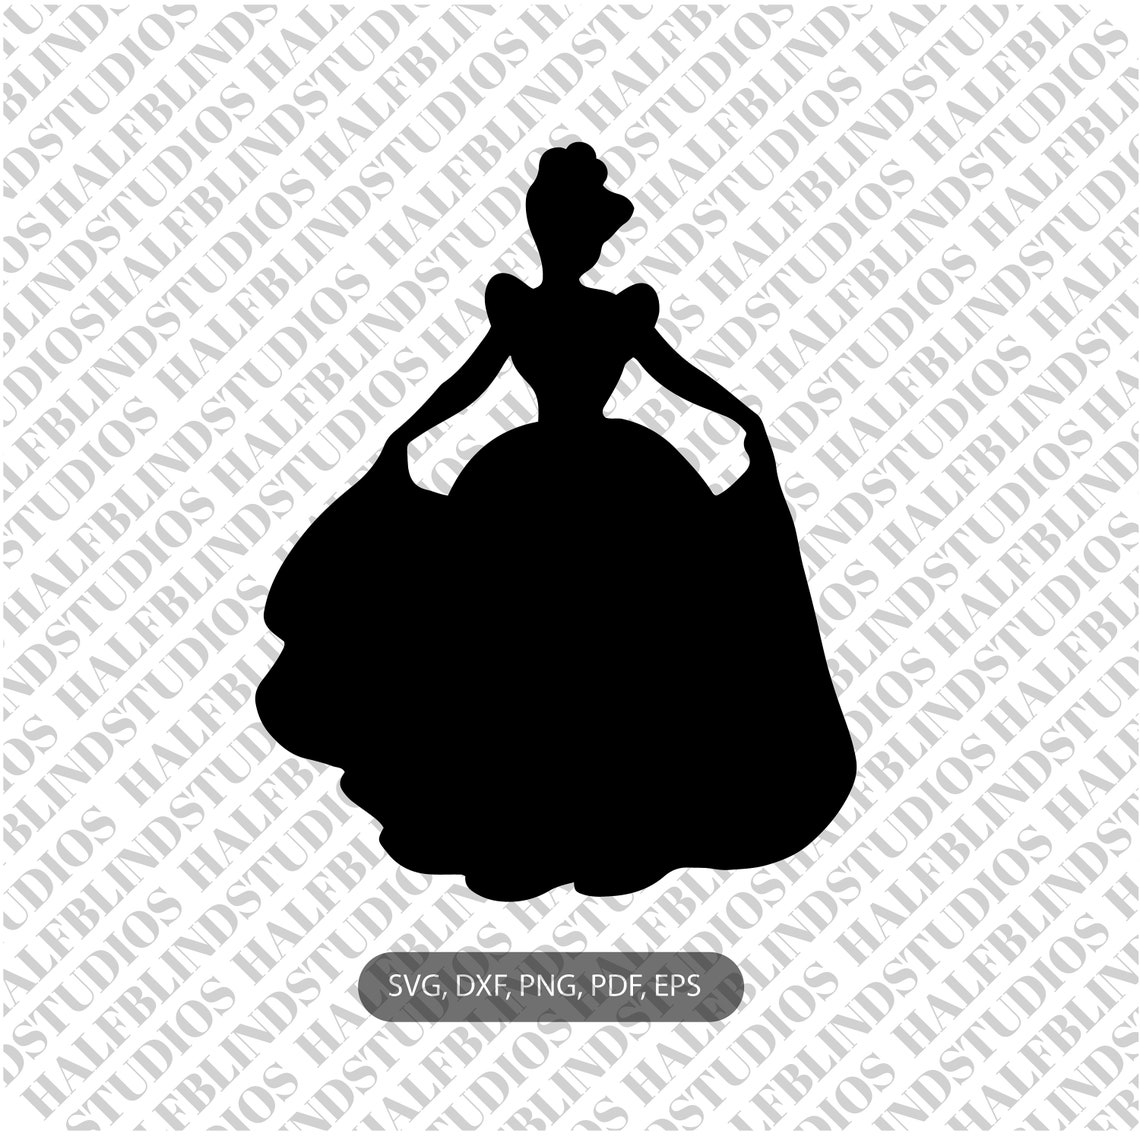 Cinderella silhouette svg dxf instant download | Etsy